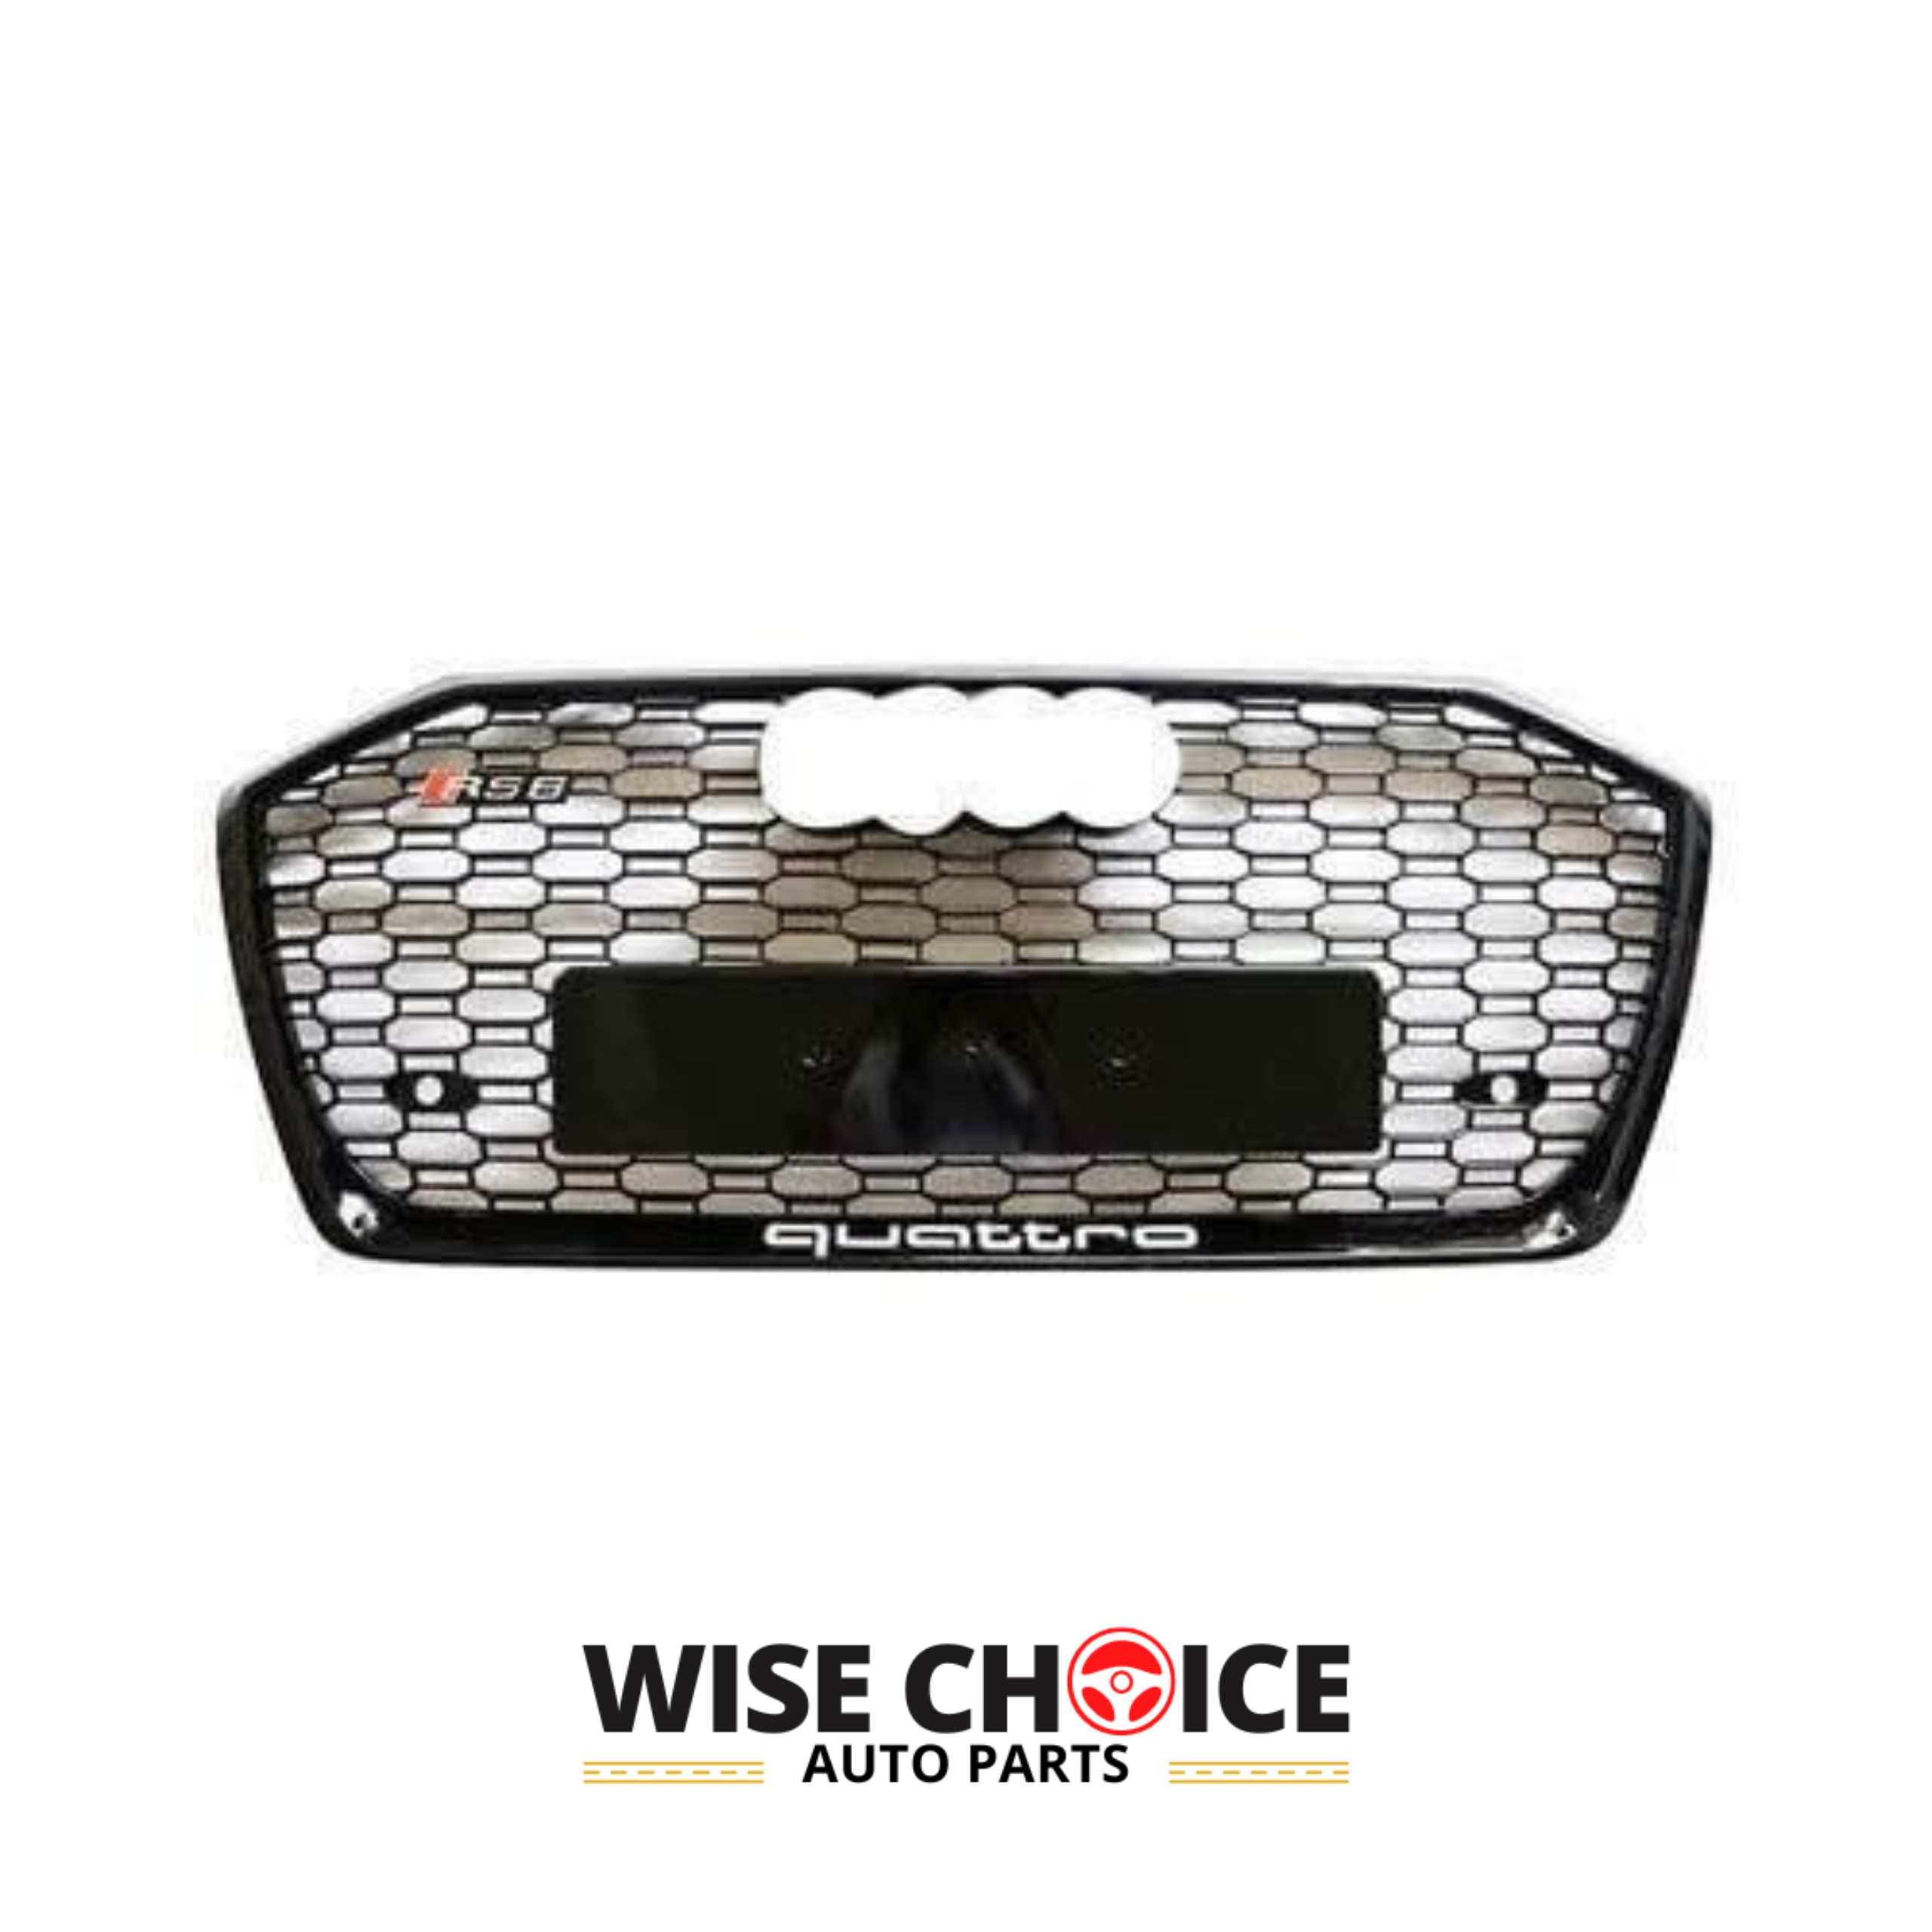 Audi RS6 Honeycomb Front Grille installed on a C8 A6/S6, enhancing the car's aggressive aesthetics.